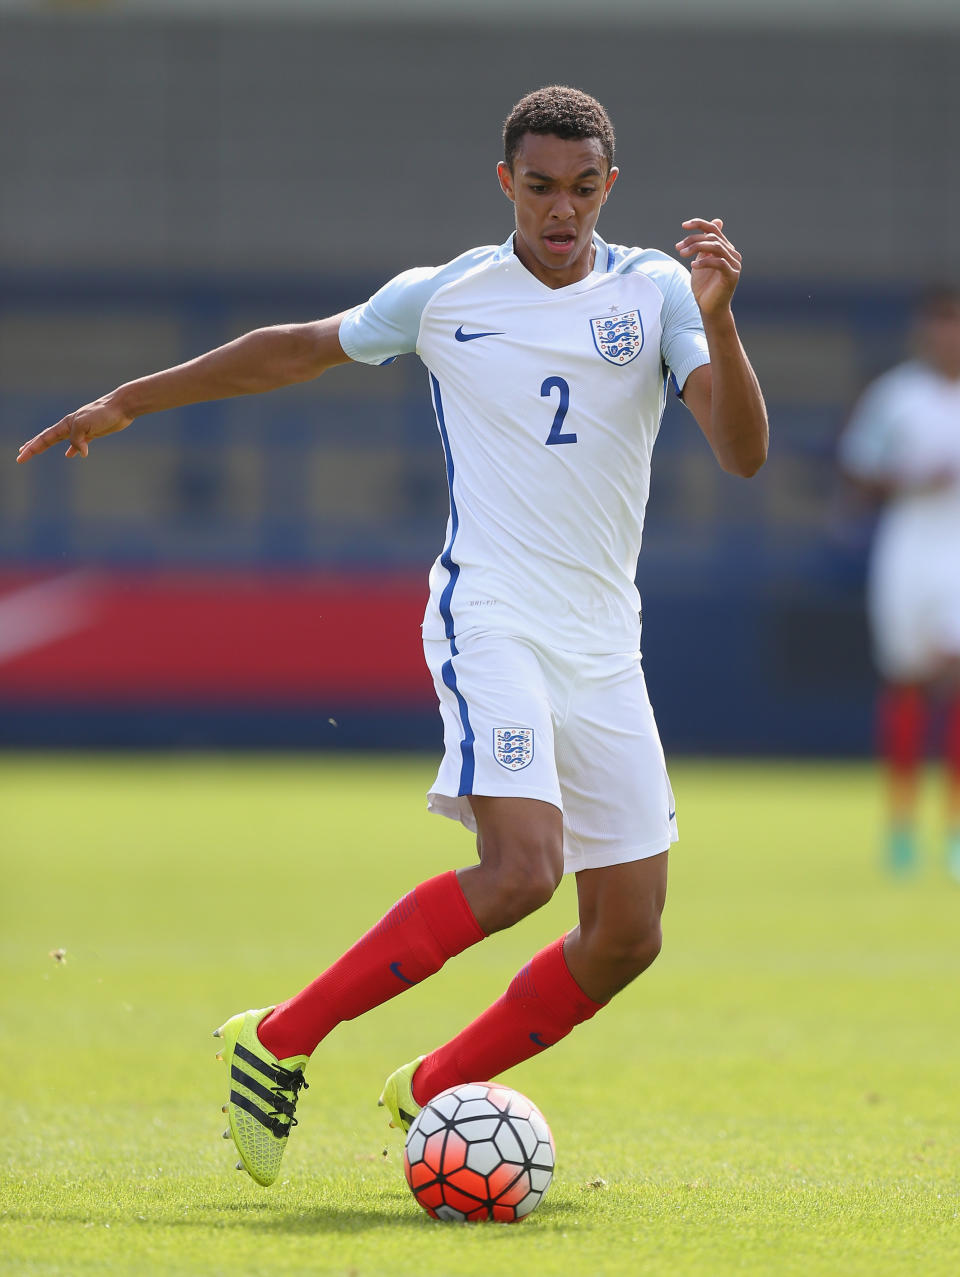 <p>Trent Alexander-Arnold<br> Age 19<br> Caps 0<br>The teenager’s senior international experience amounts to no more than a training session at St George’s Park to make up the numbers but having excelled in Liverpool’s charge to the Champions League final, he should not be daunted. A bold, attacking option at wing-back.<br>Key stat: Had only 163 minutes of Premier League experience before this season. </p>